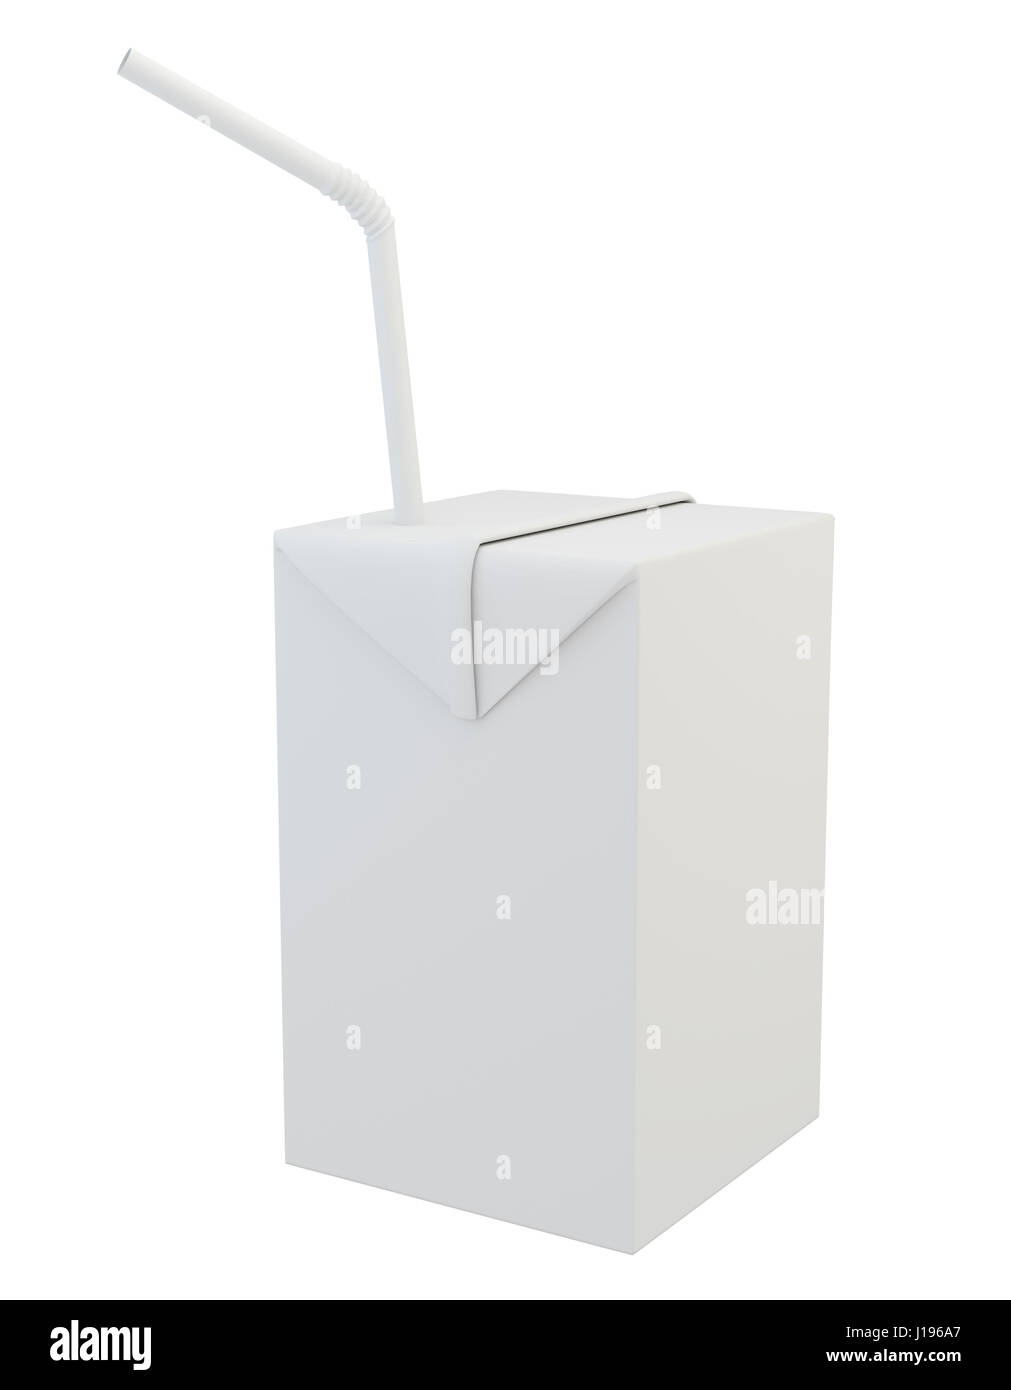 Blank milk or juice carton package with straw. Stock Photo